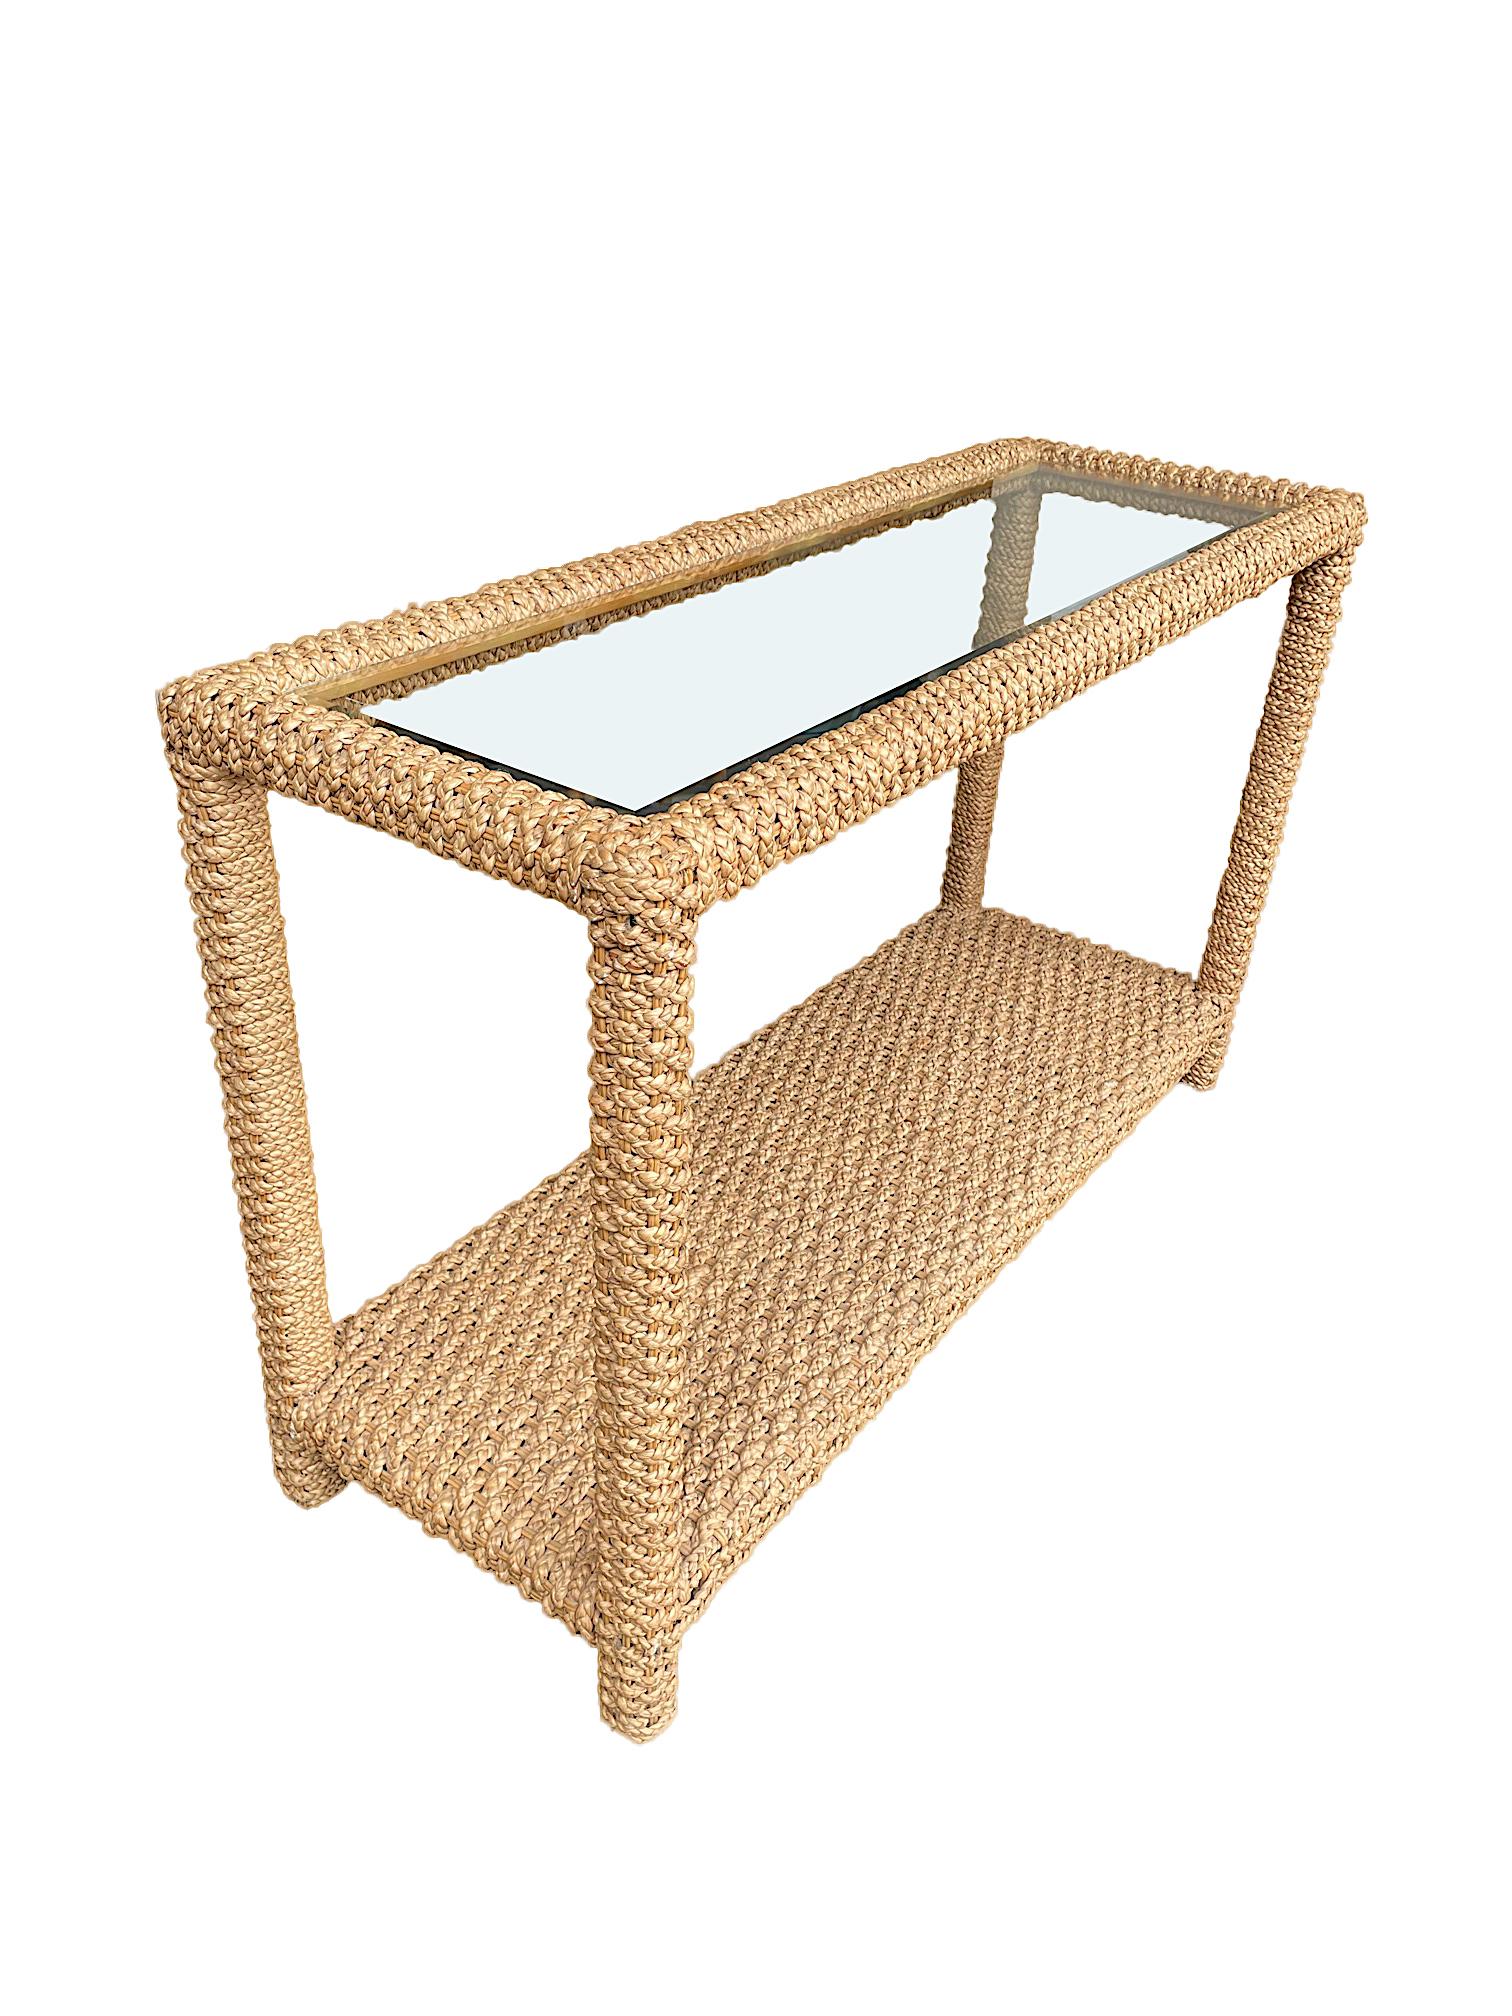 Mid-20th Century Stunning 1950s Rope Console by Adrian Audoux and Frida Minet with Glass Shelf